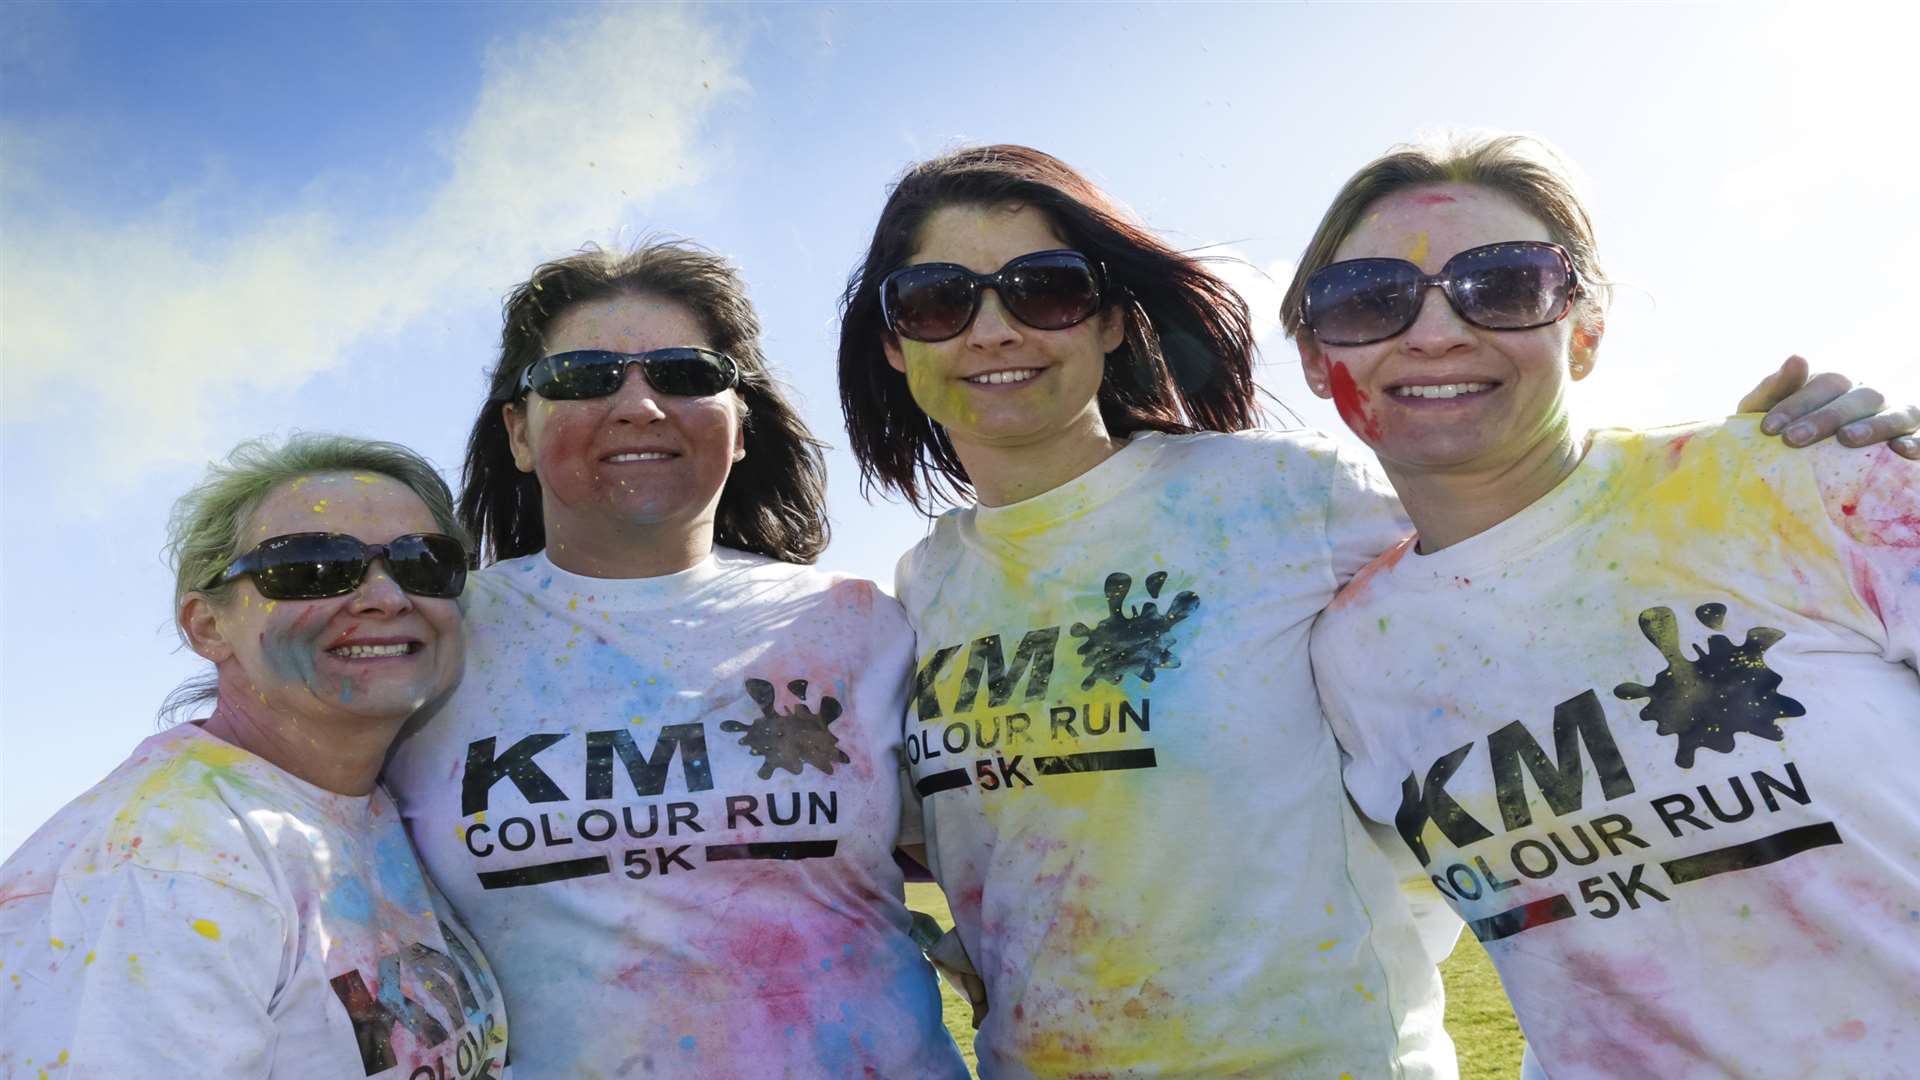 The KM Colour Run is one of the many fundraising events staged throughout the year